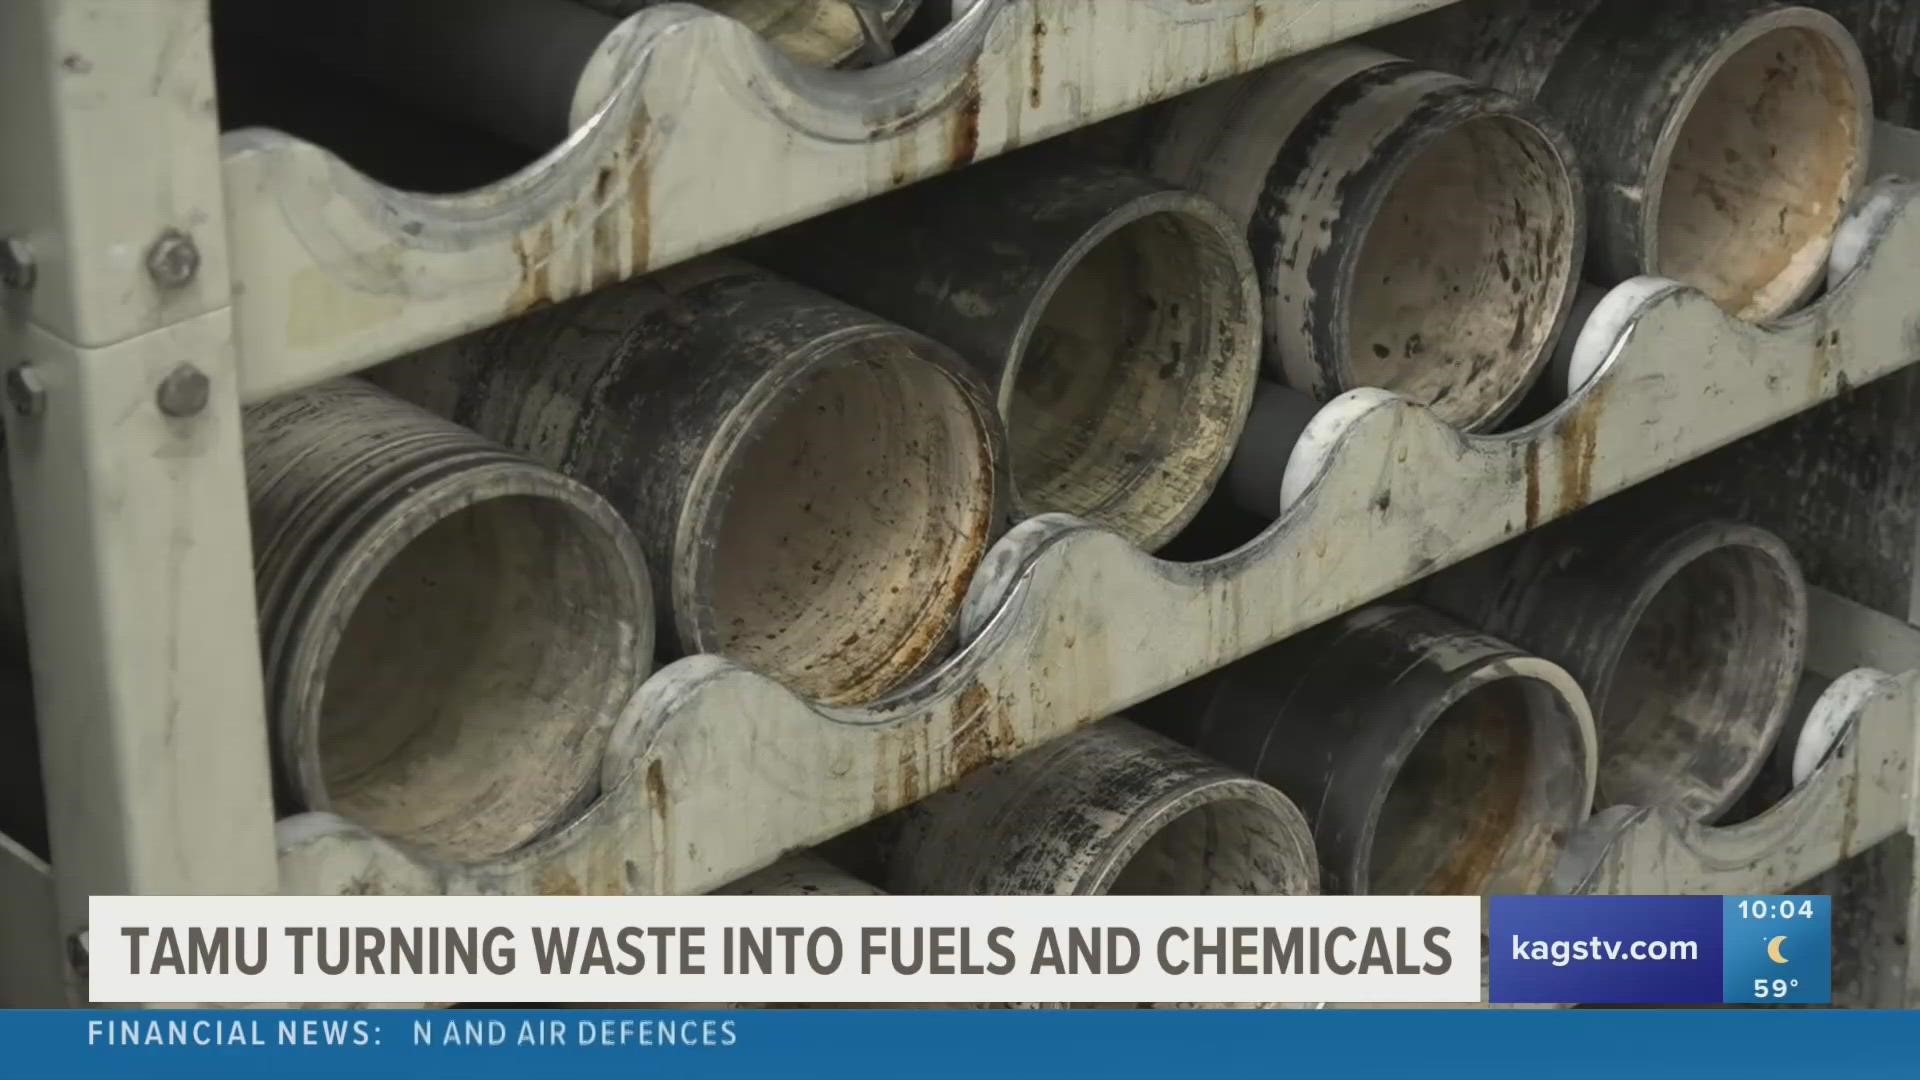 Instead of throwing away waste into a trash can or dump, a Texas A&M University professor is turning biomass into renewable resources and energy.